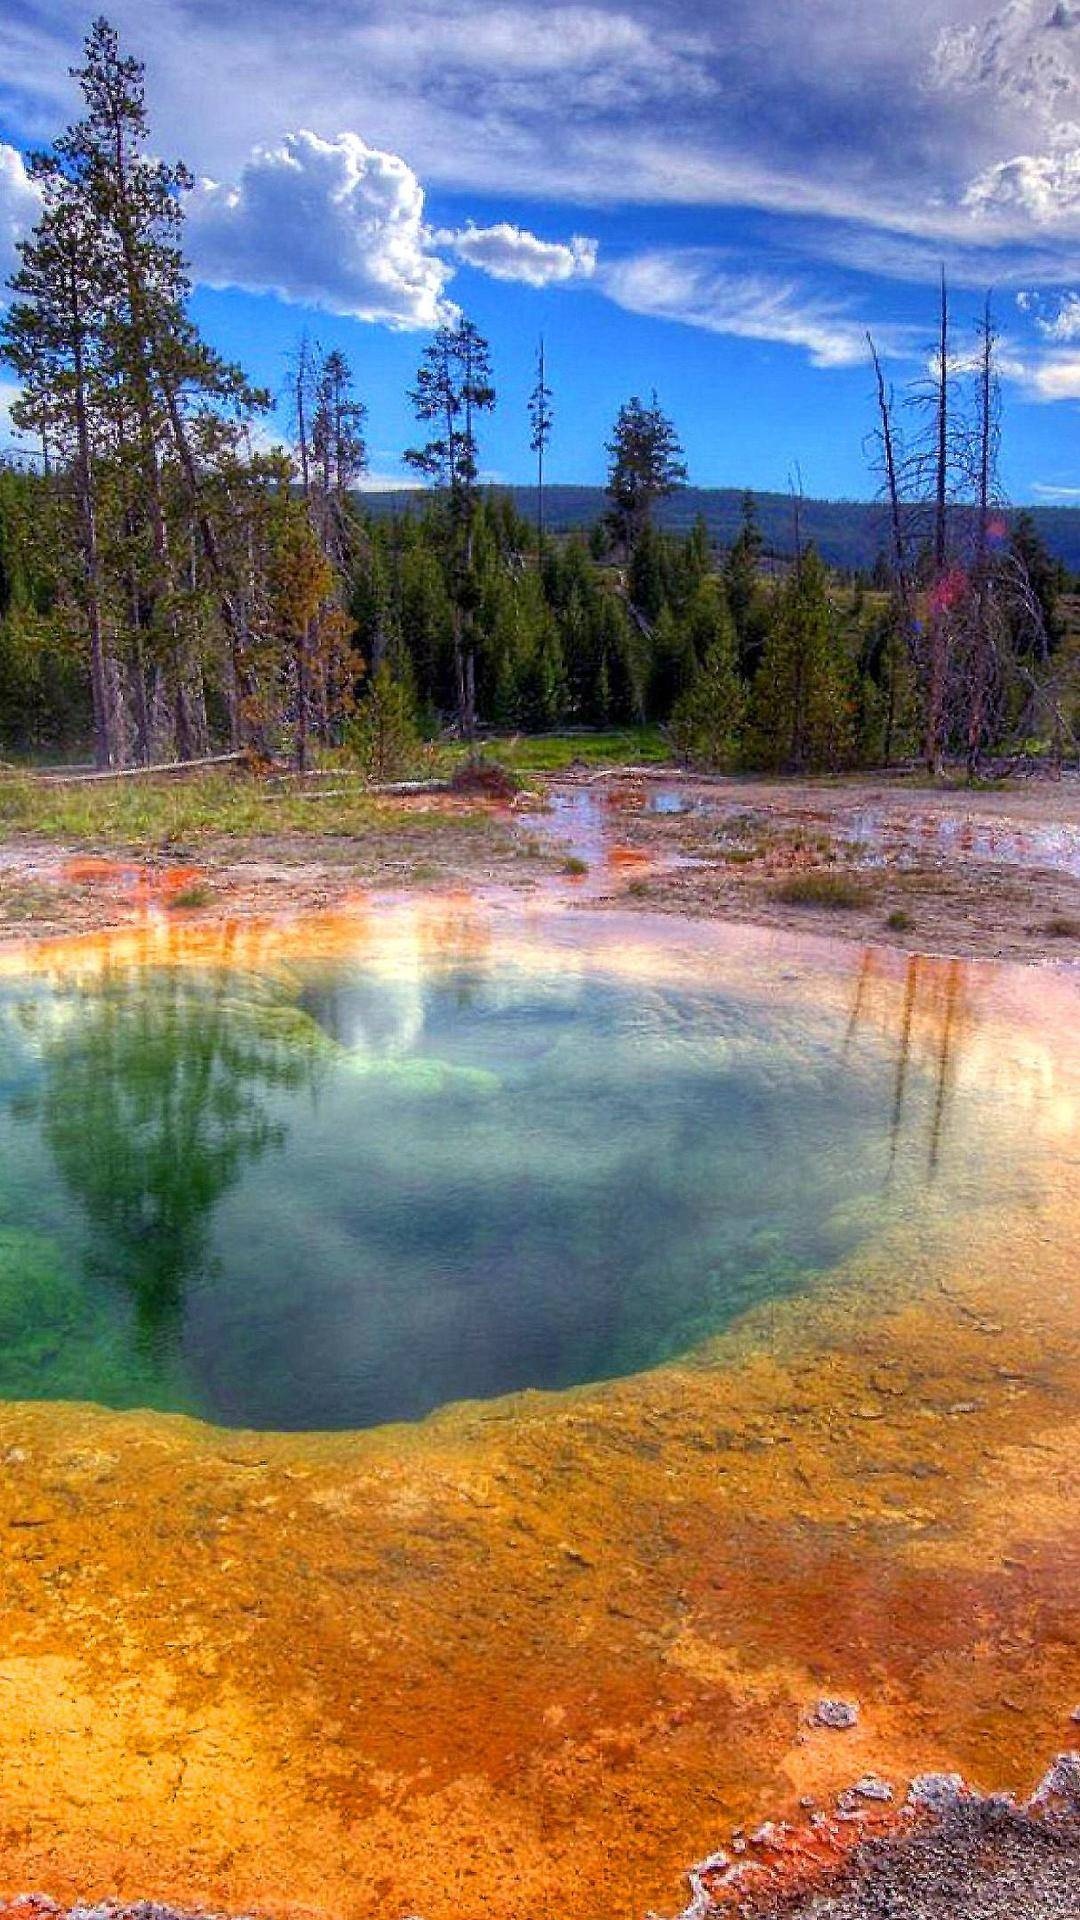 Yellowstone National Park, Nature's wonder, Android appstore, Travel inspiration, 1080x1920 Full HD Phone